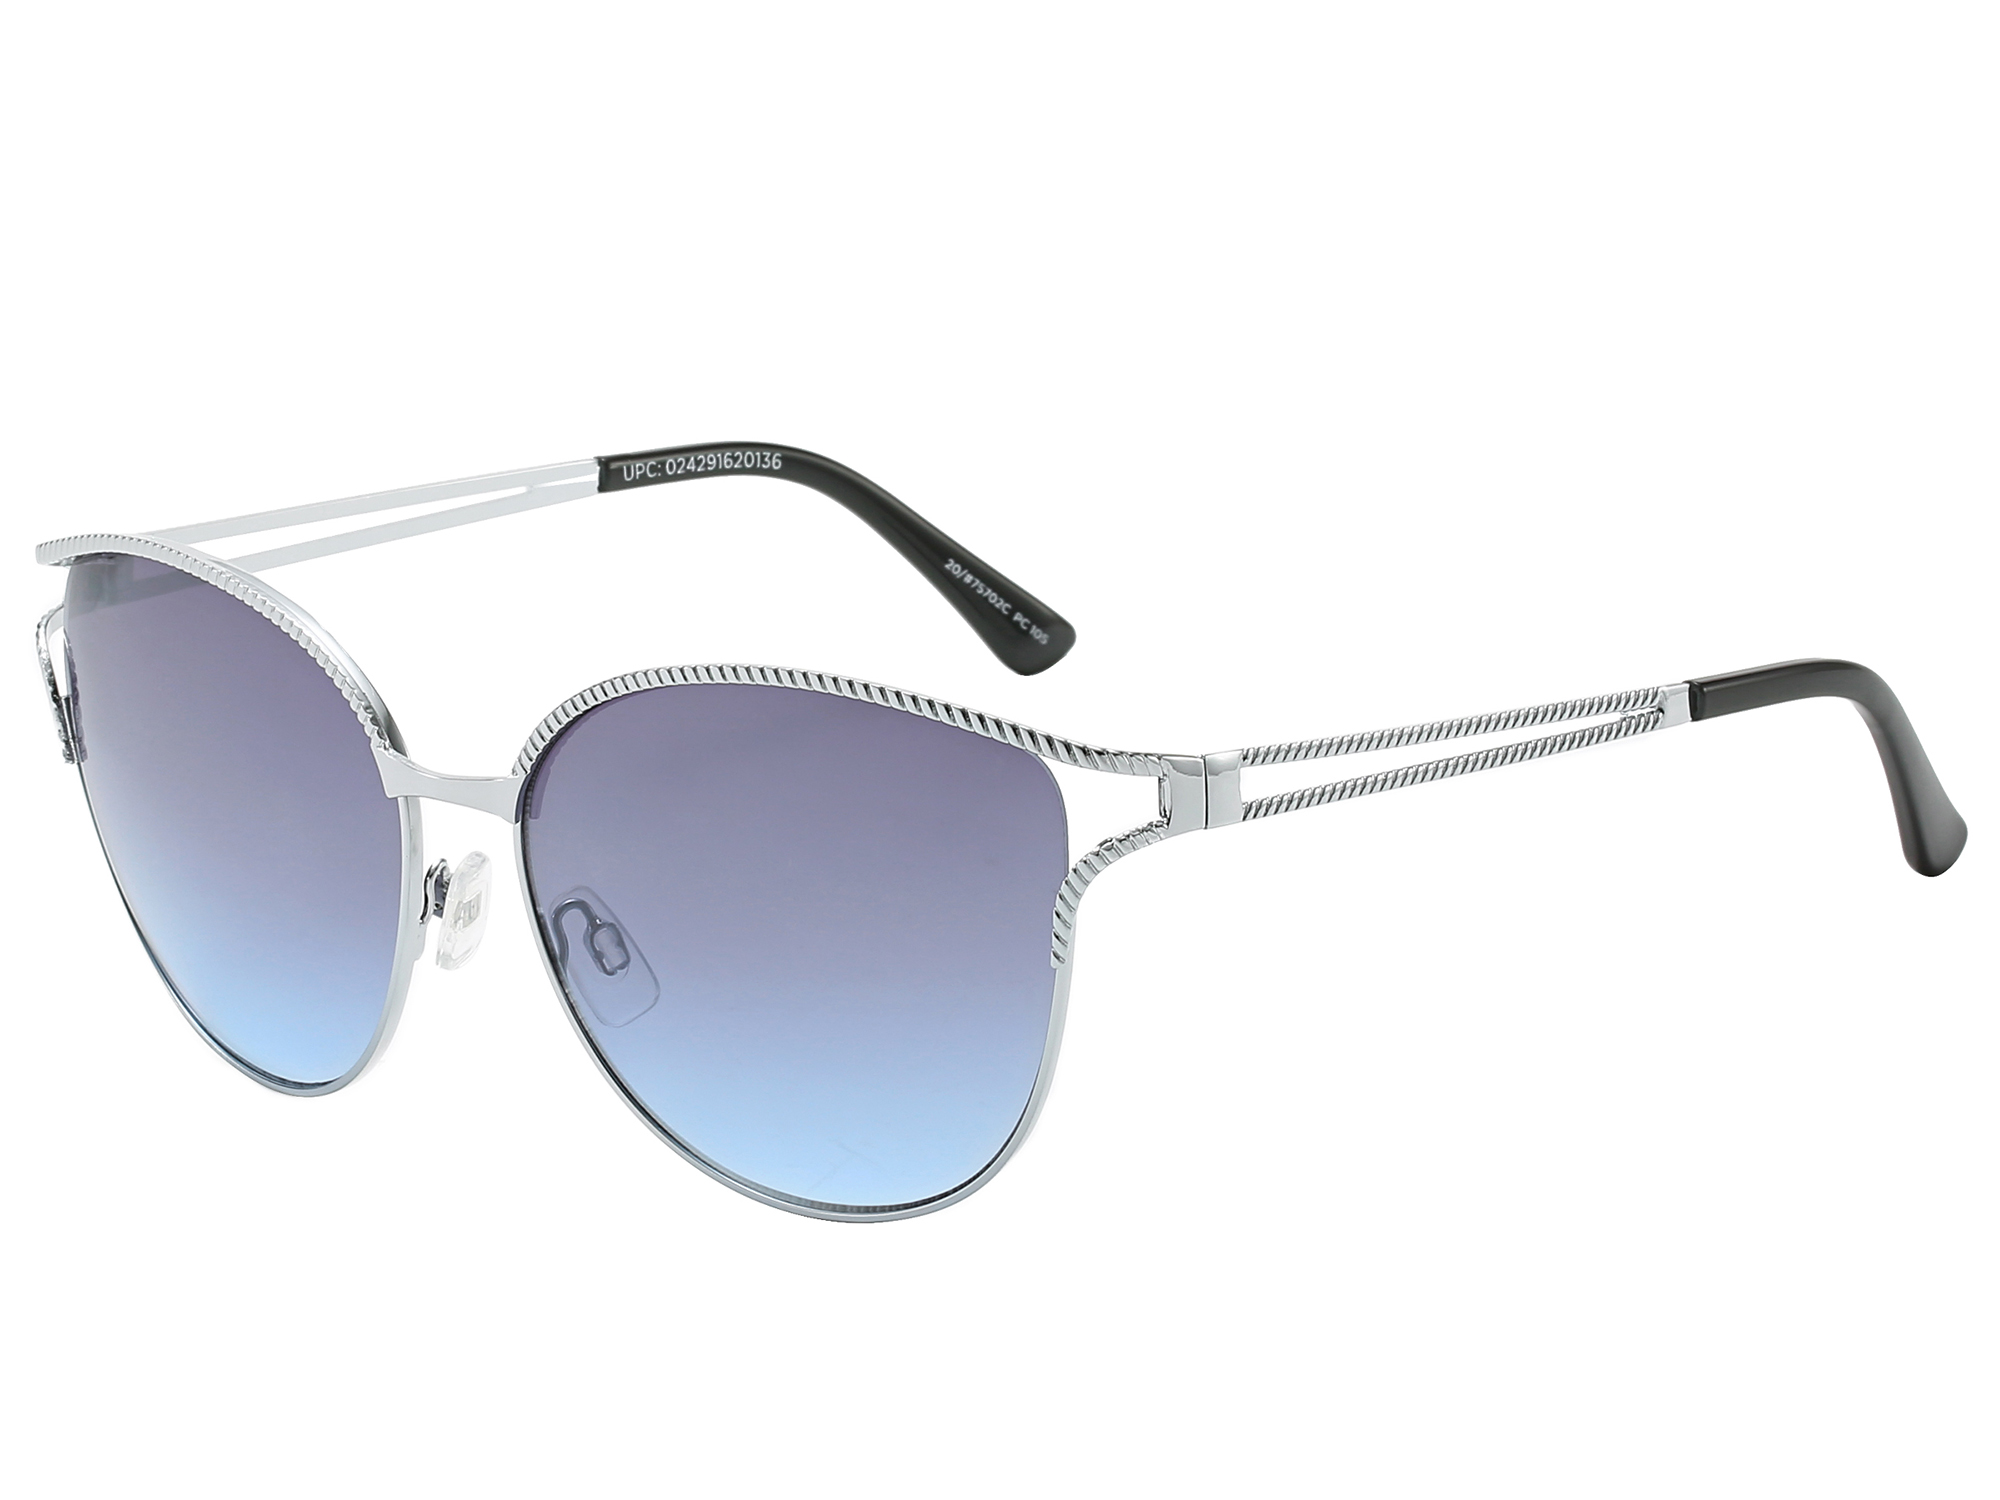 Piranha Women's "Twiggy" Silver Frame Mod Fashion Sunglasses with Purple and Blue Gradient Lens - image 1 of 2